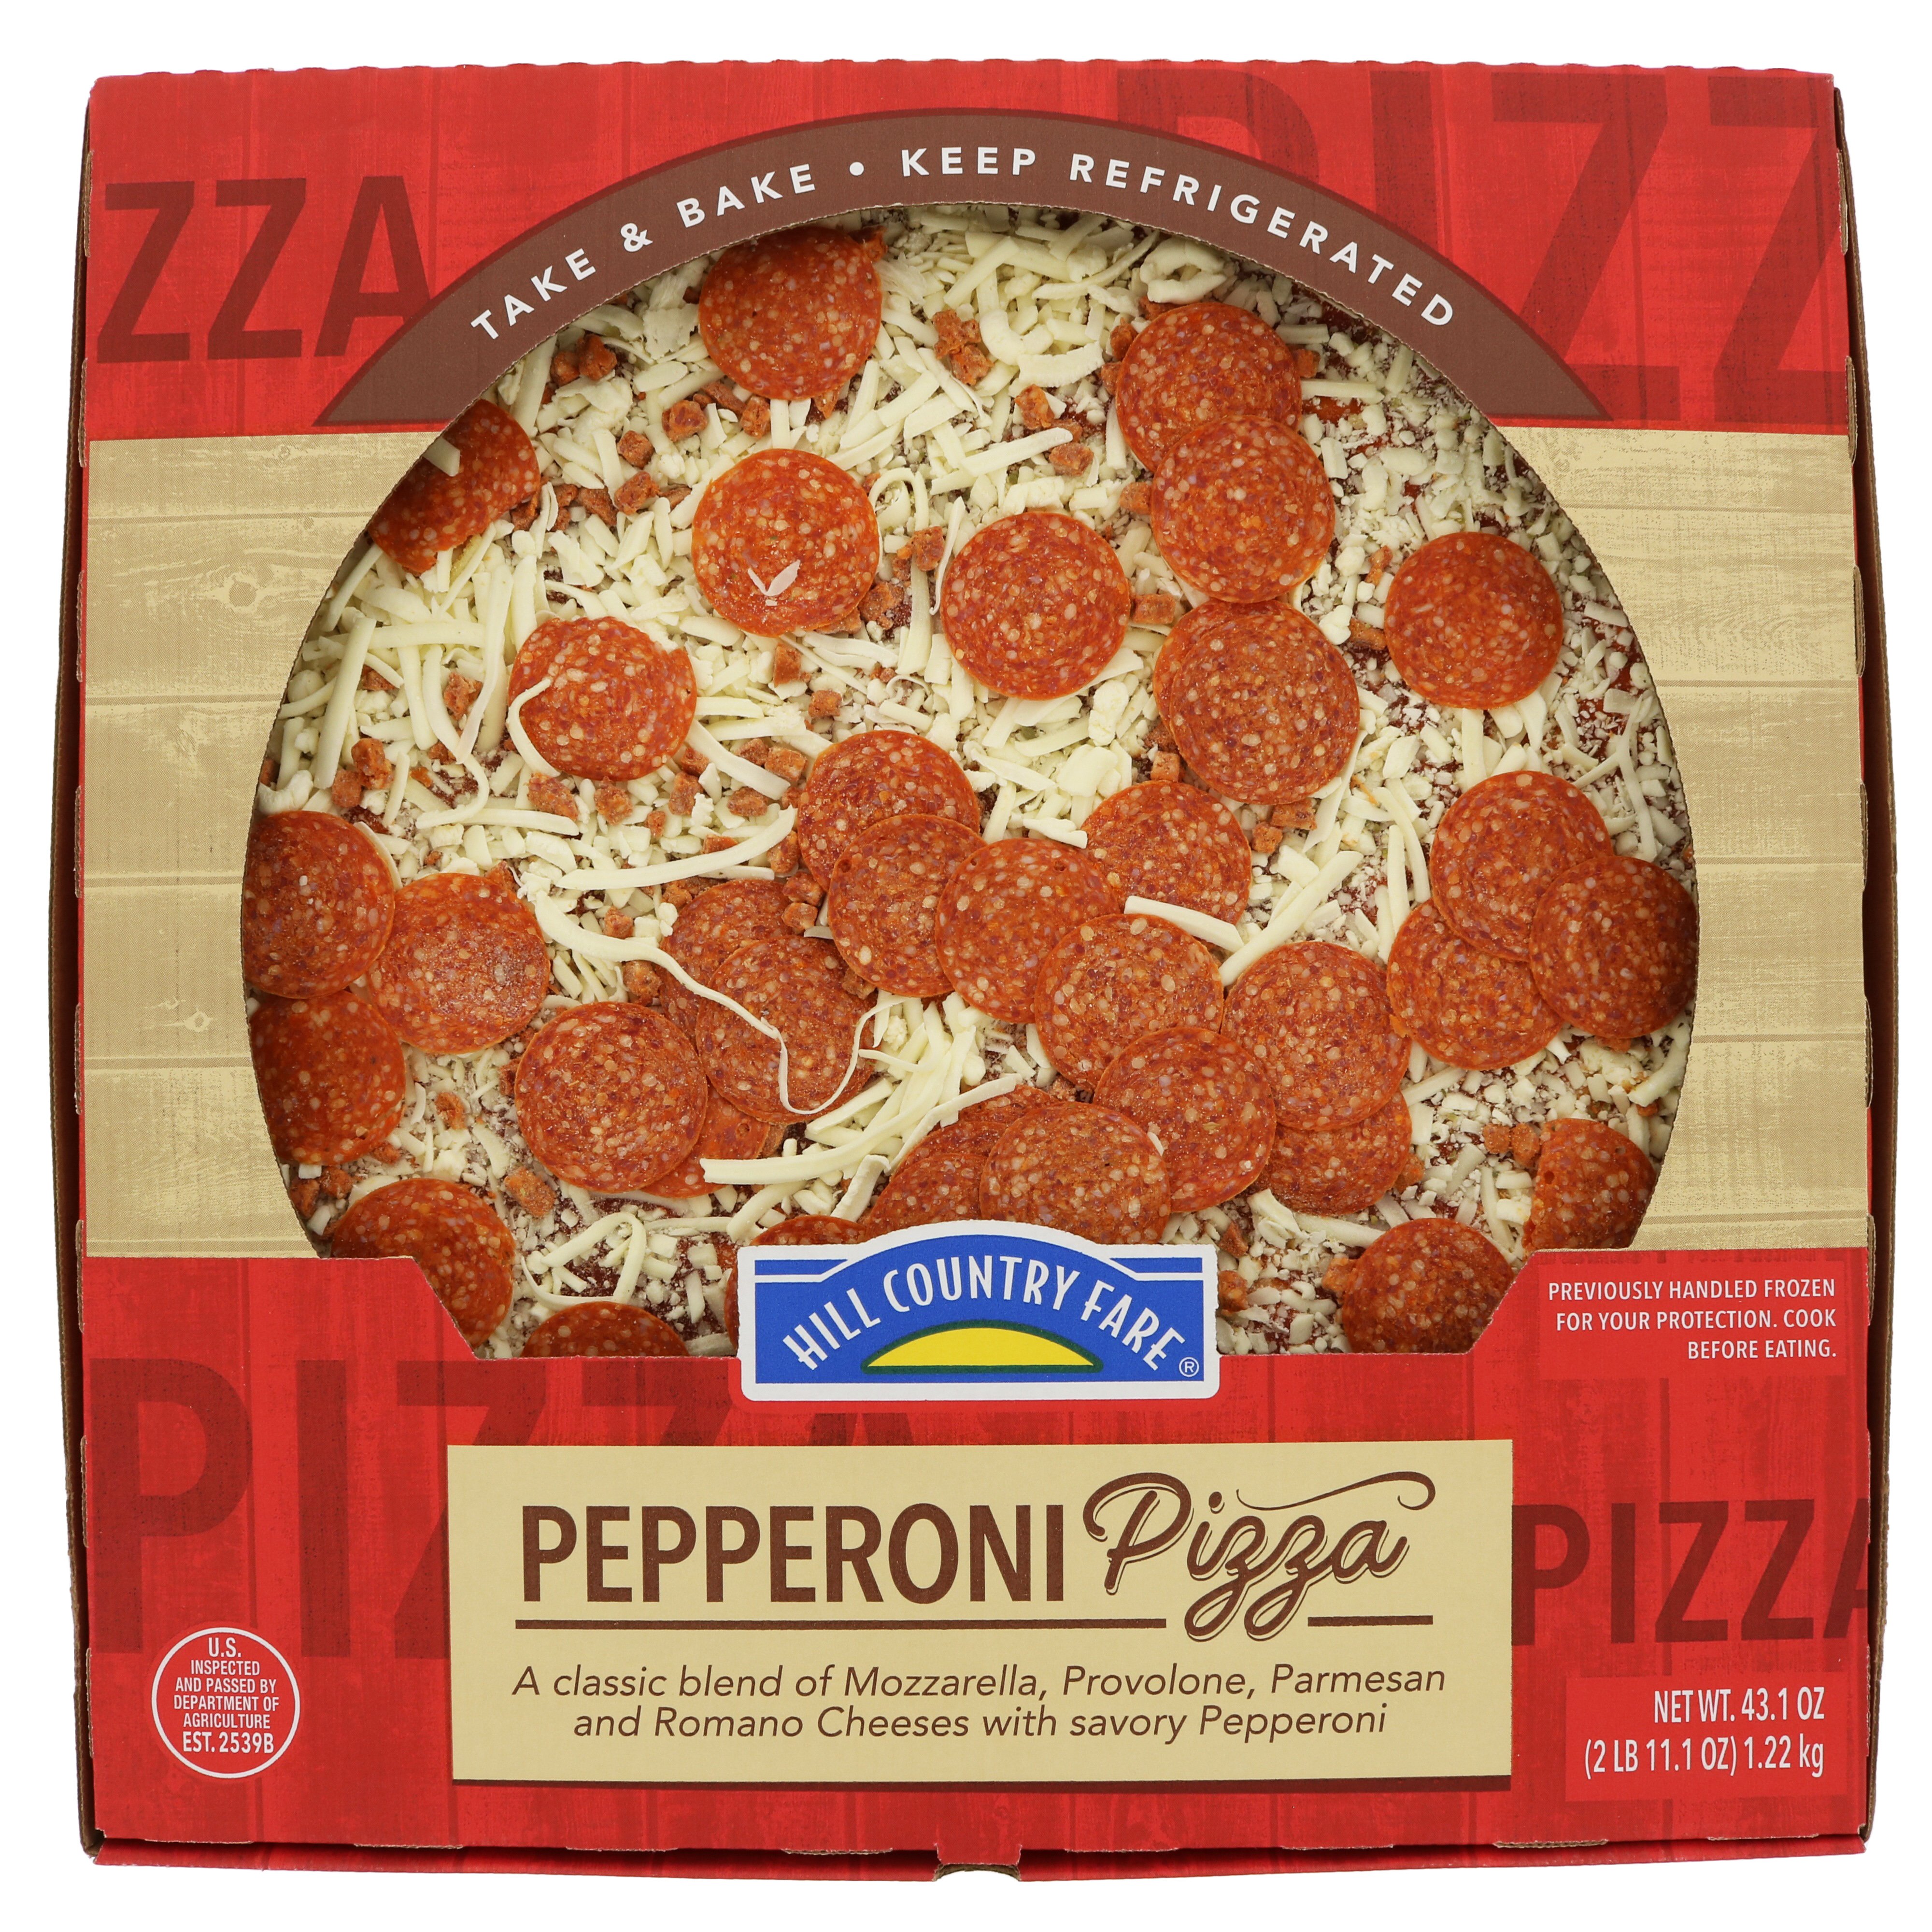 Hill Country Fare Pepperoni Pizza Shop Pizza at HEB